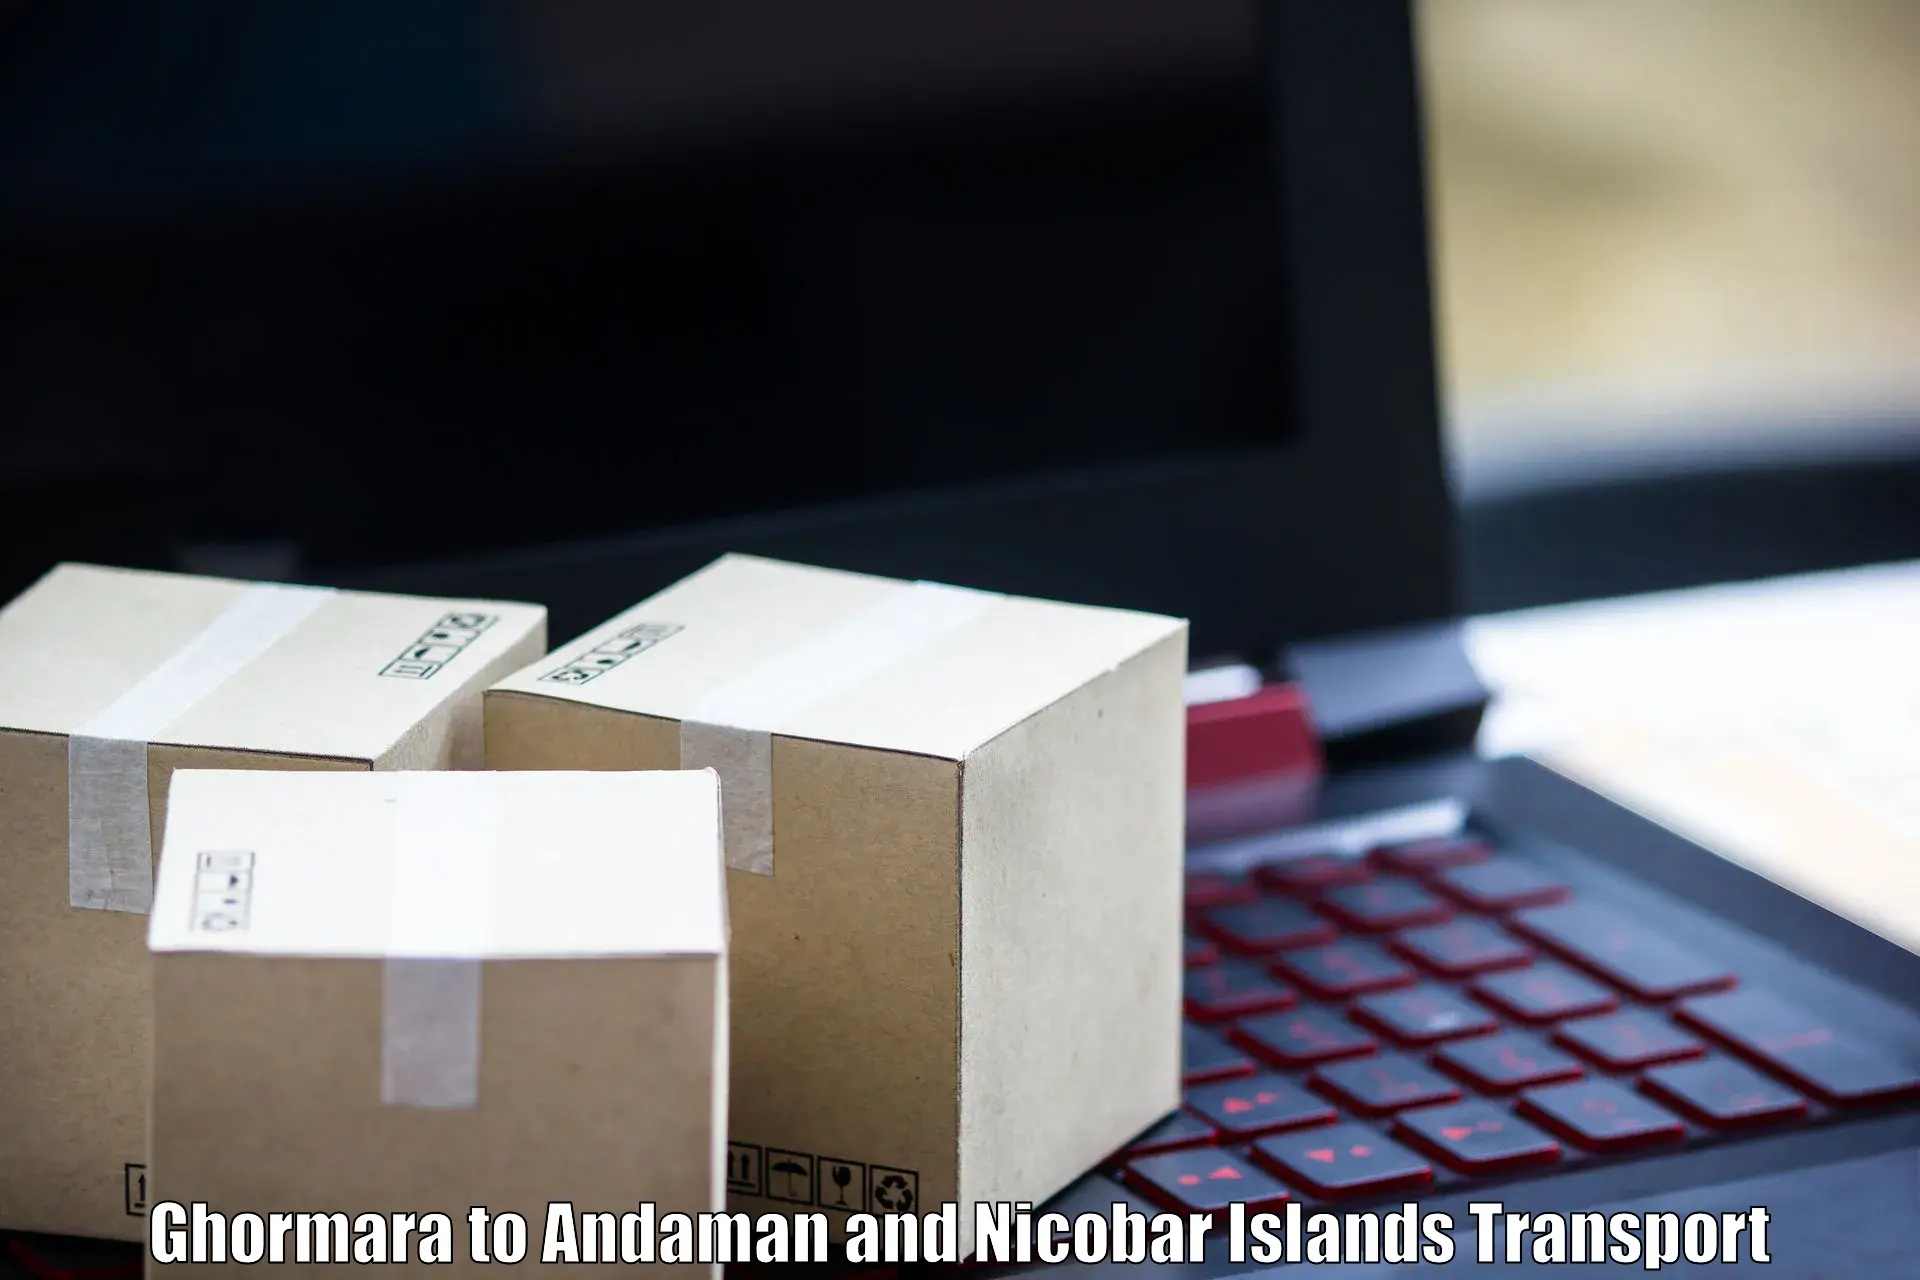 Daily parcel service transport Ghormara to South Andaman